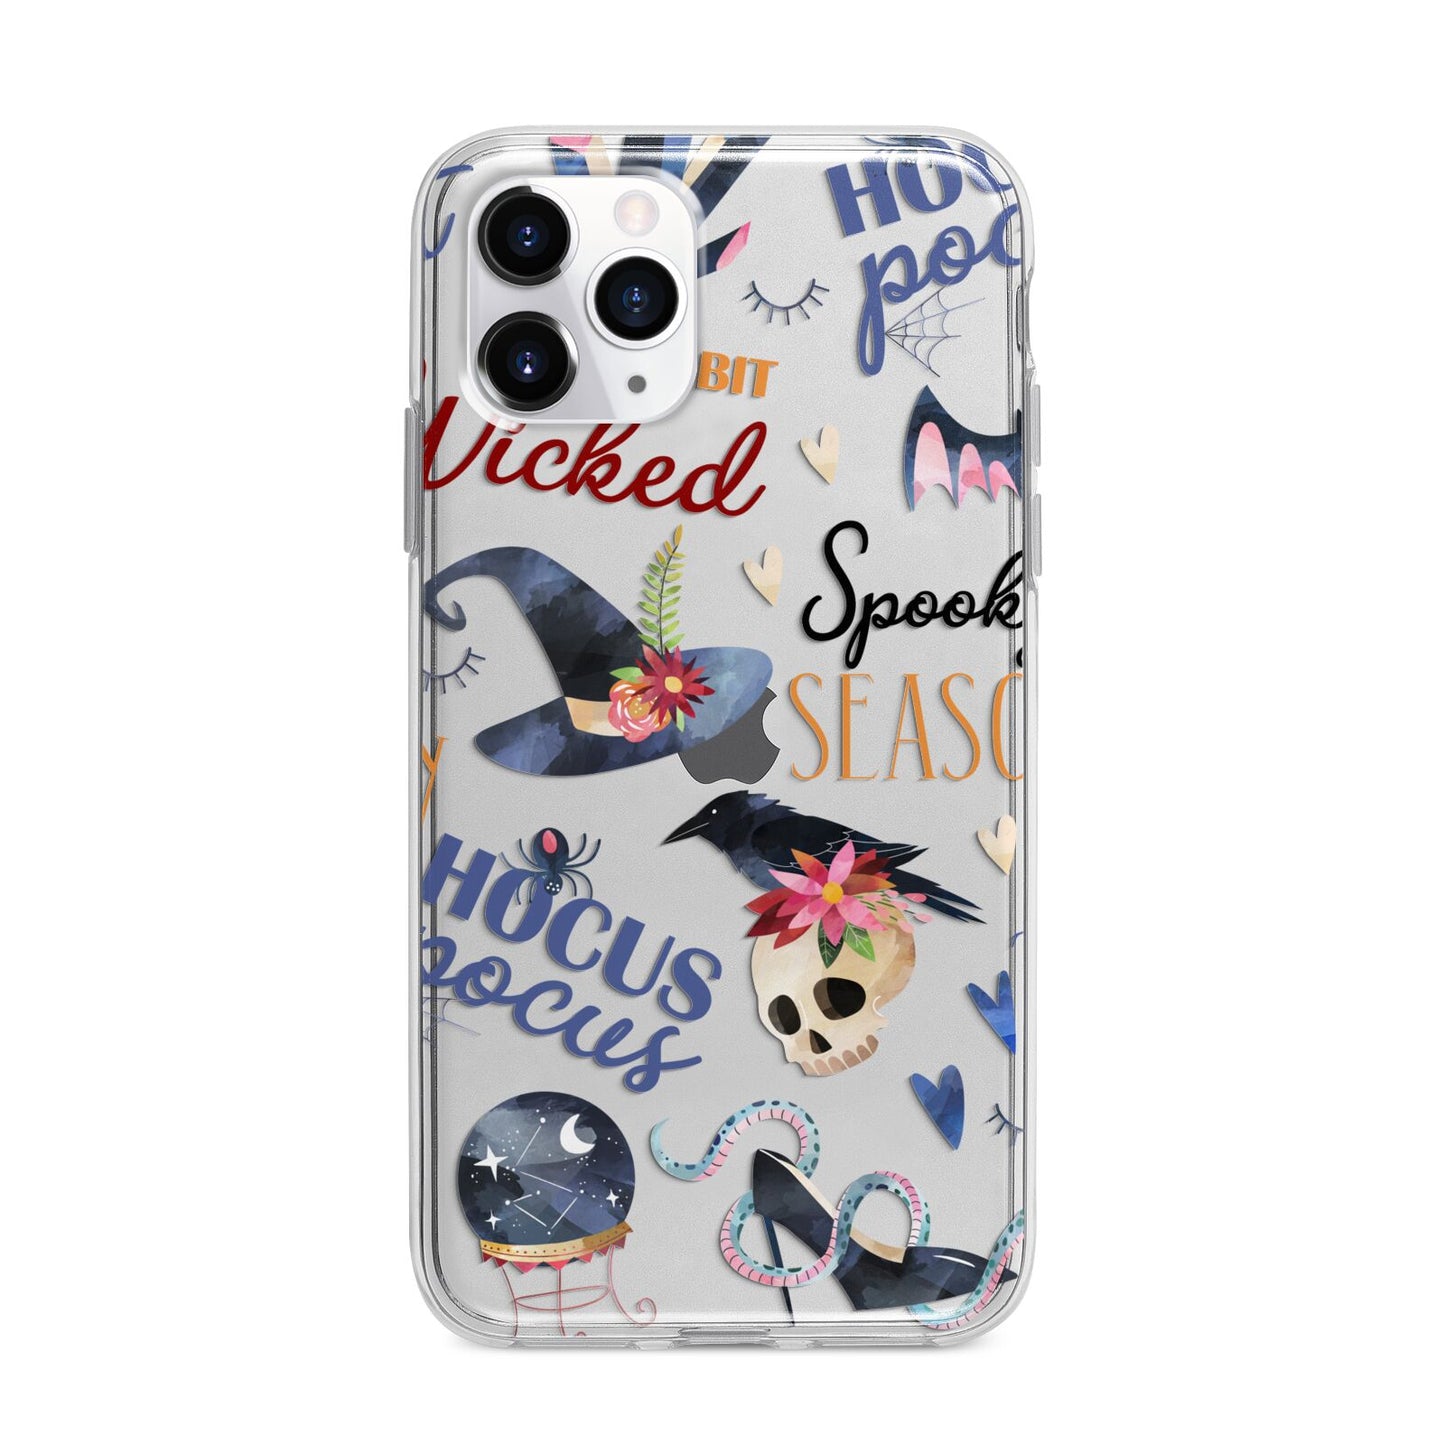 Fun Halloween Catchphrases and Watercolour Illustrations Apple iPhone 11 Pro Max in Silver with Bumper Case